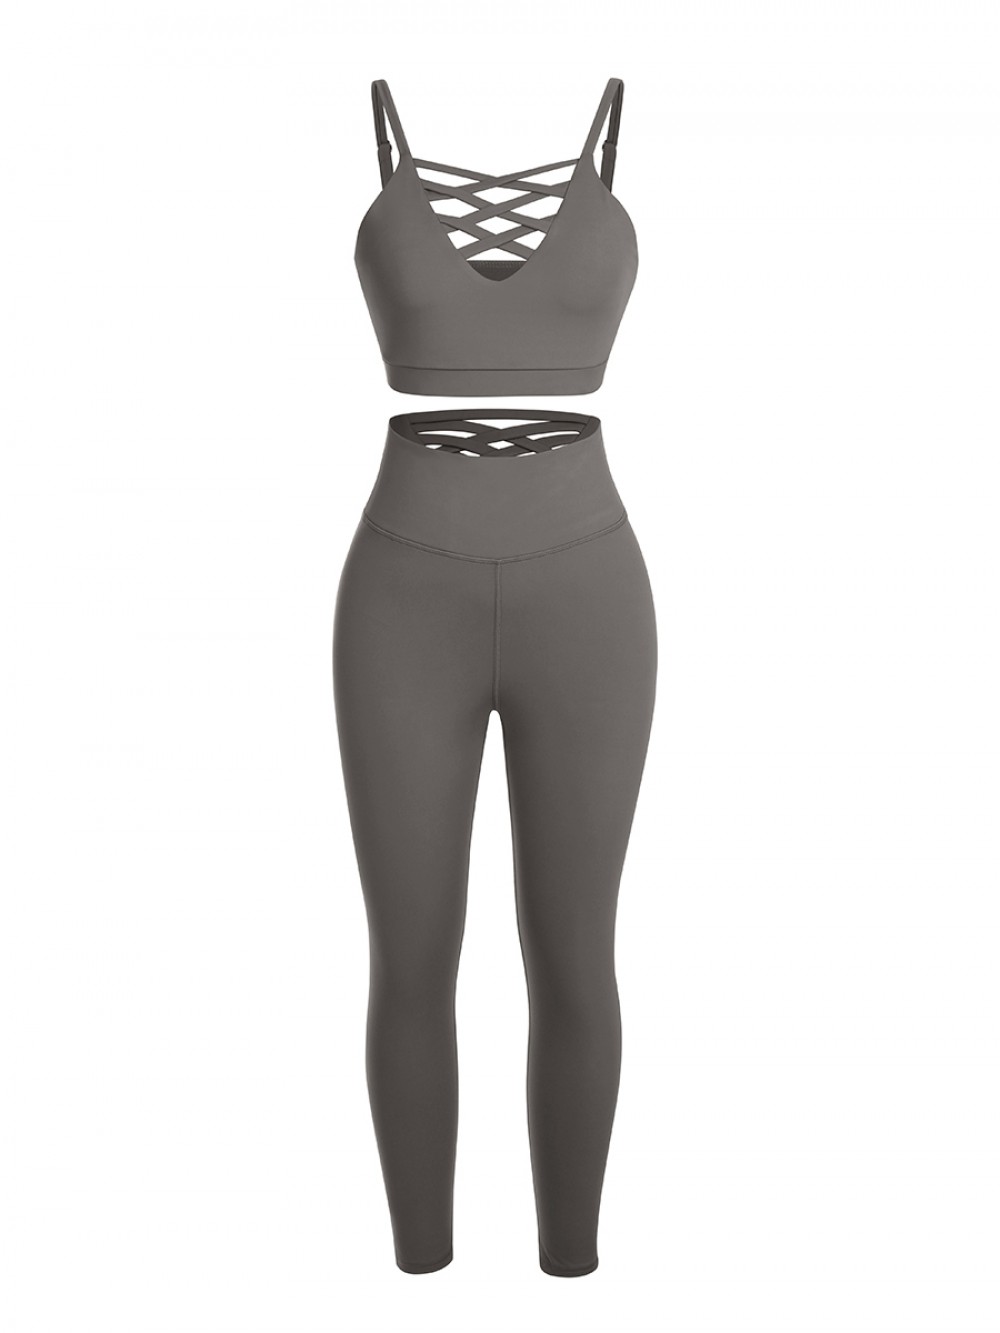 Gray Sports Sets Low Back Wide Waistband Pockets Natural Outfit